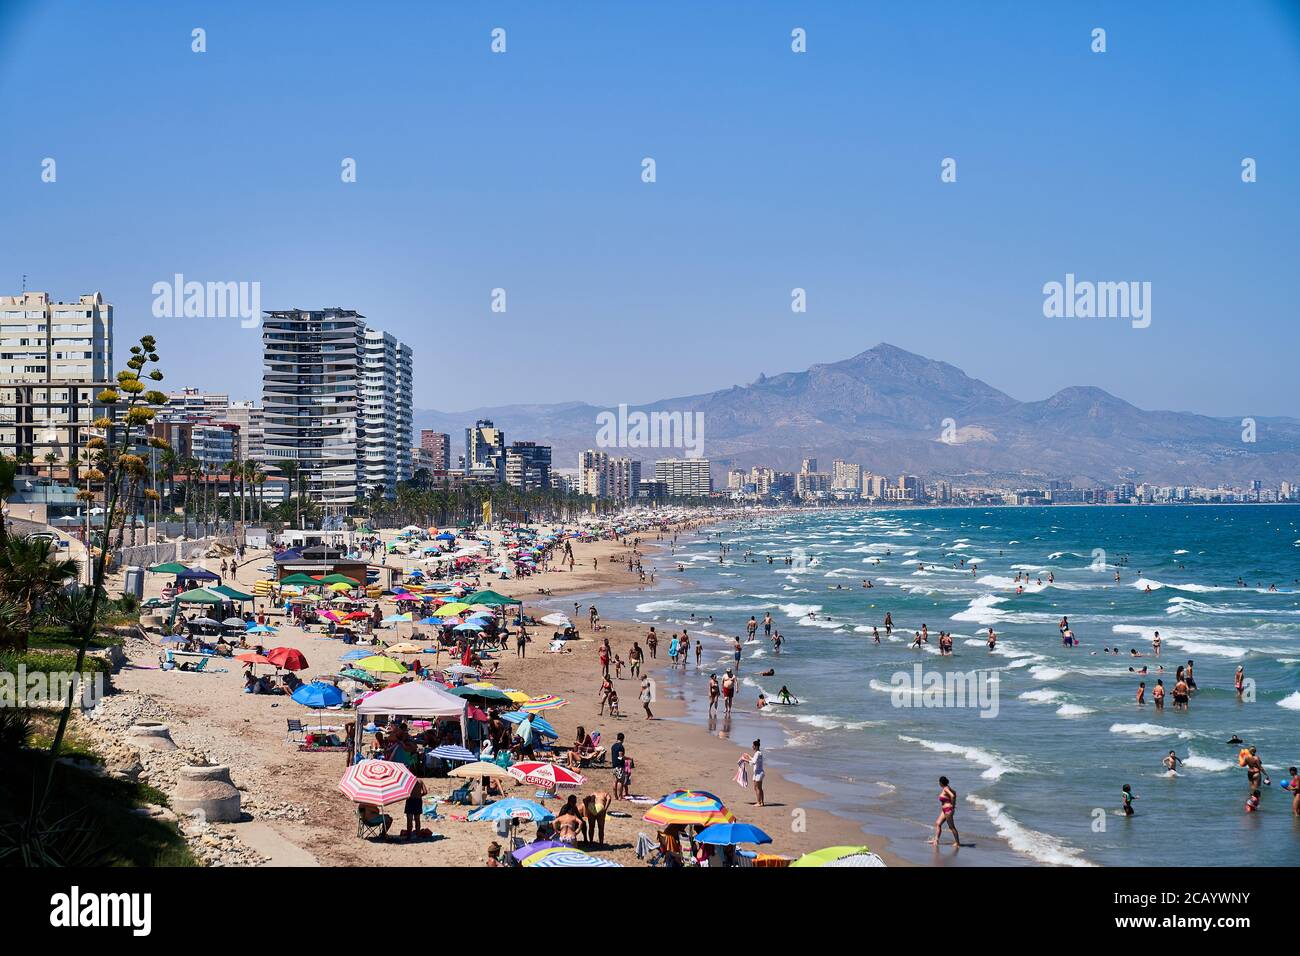 The view from the cape across to San Juan Beach with mountains behind, Alicante, Spain, Europe, July 2020 Stock Photo